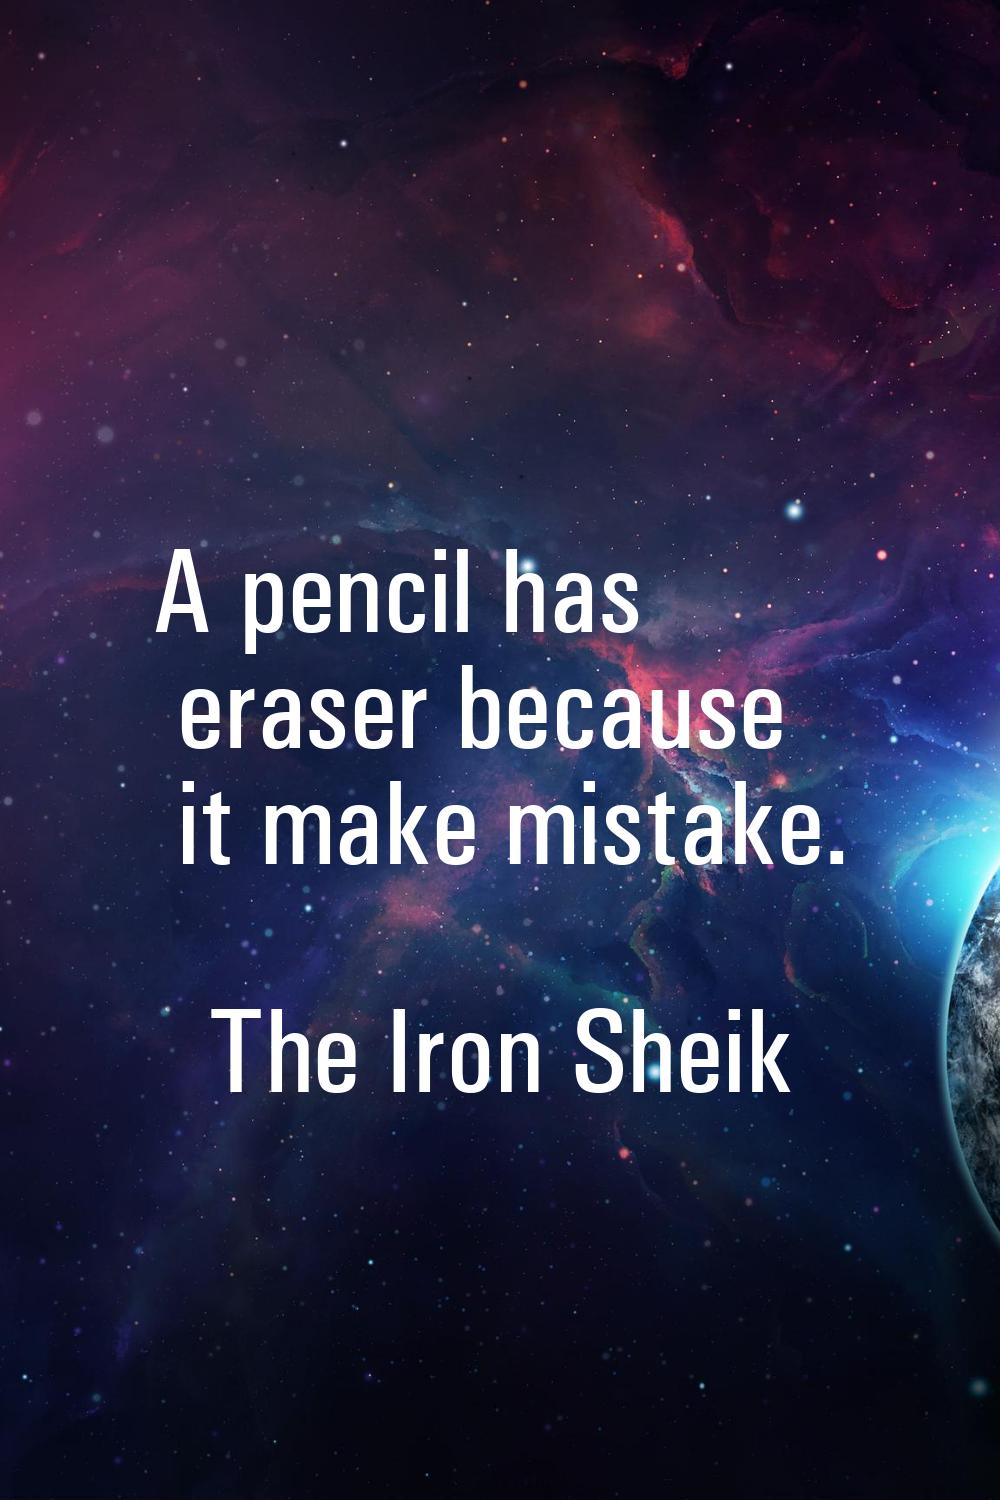 A pencil has eraser because it make mistake.